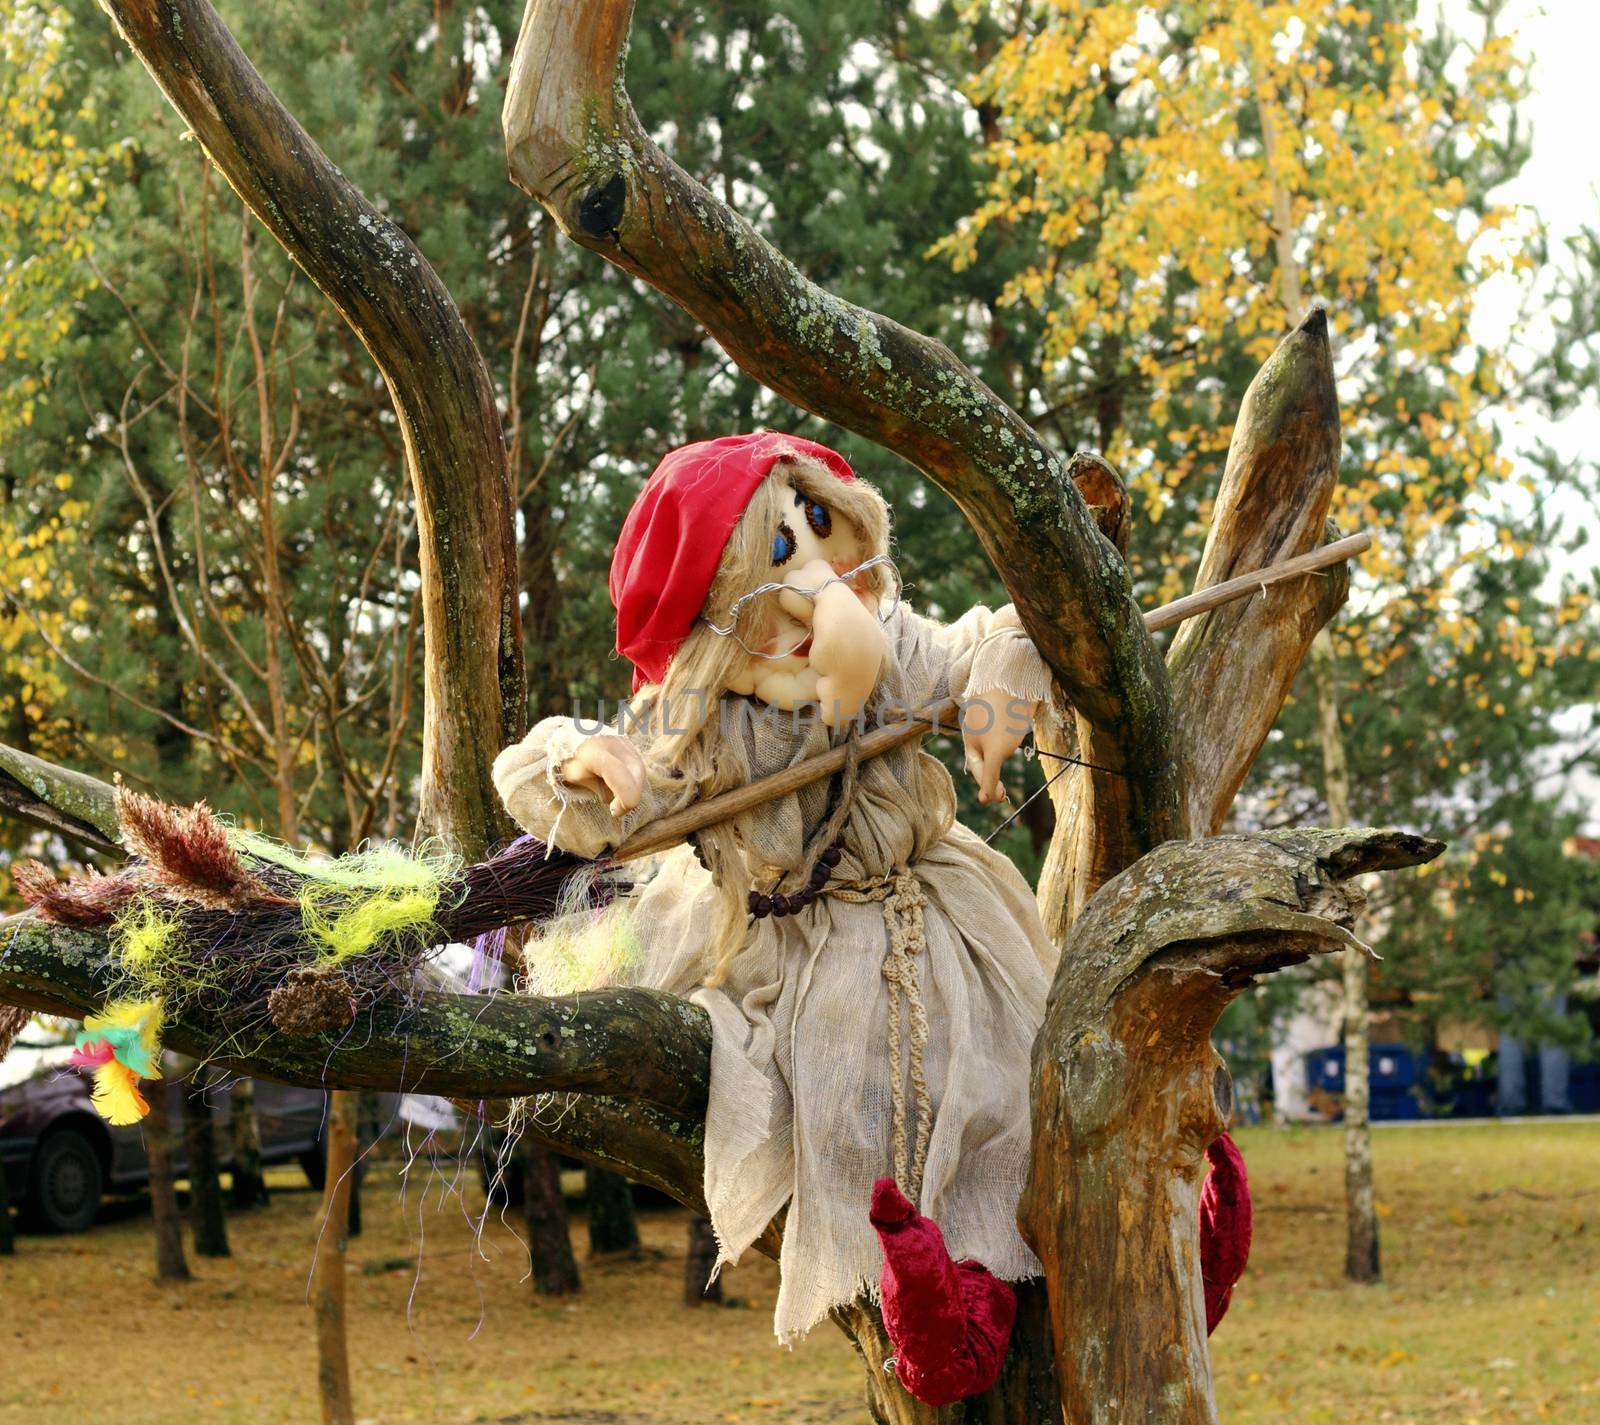 This is a witch sitting on the tree branch